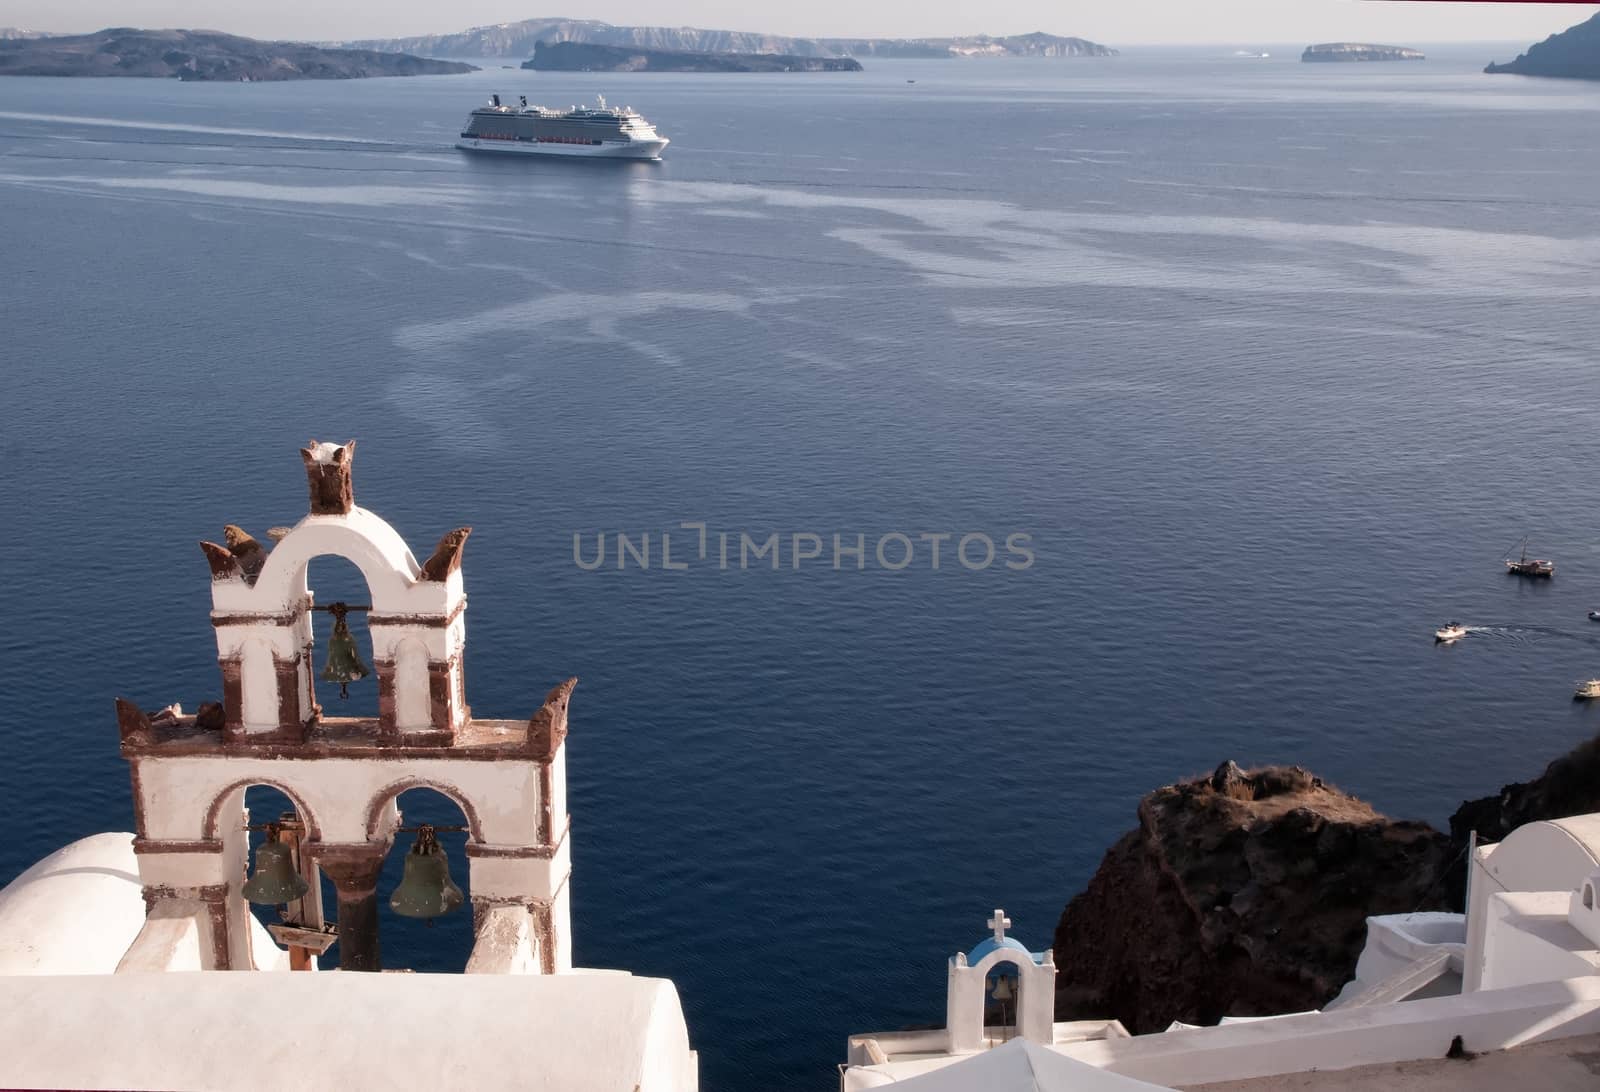 Oia is a village in the north west edge of the Santorini island with white houses, narrow streets and amazing seaviews.